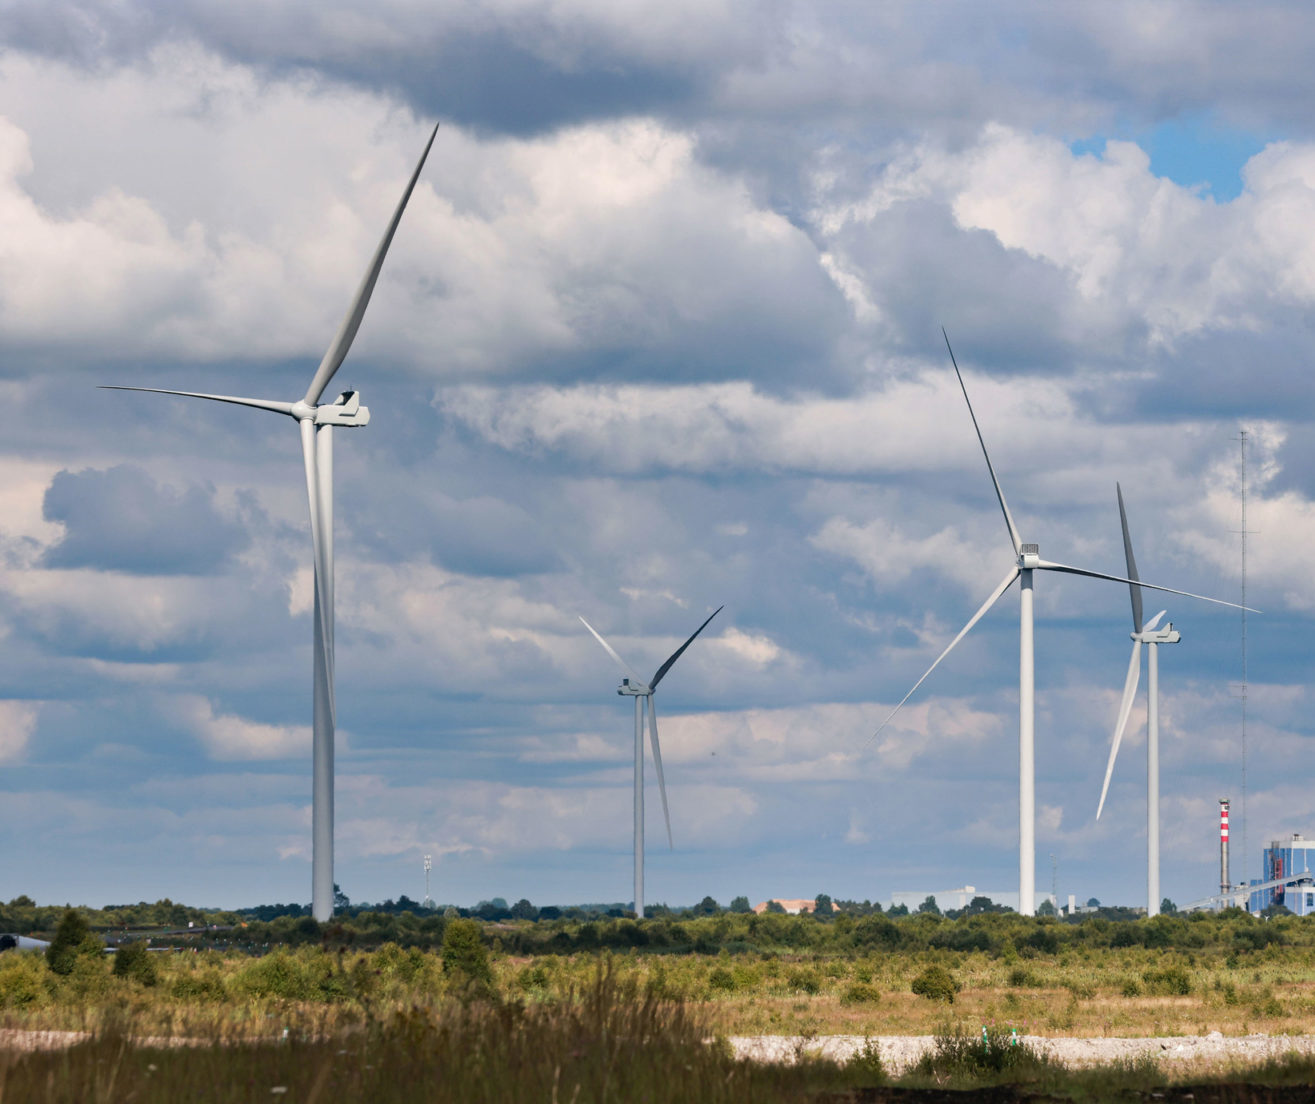 File photo shows a wind farm in Cloncreen, Co Offaly